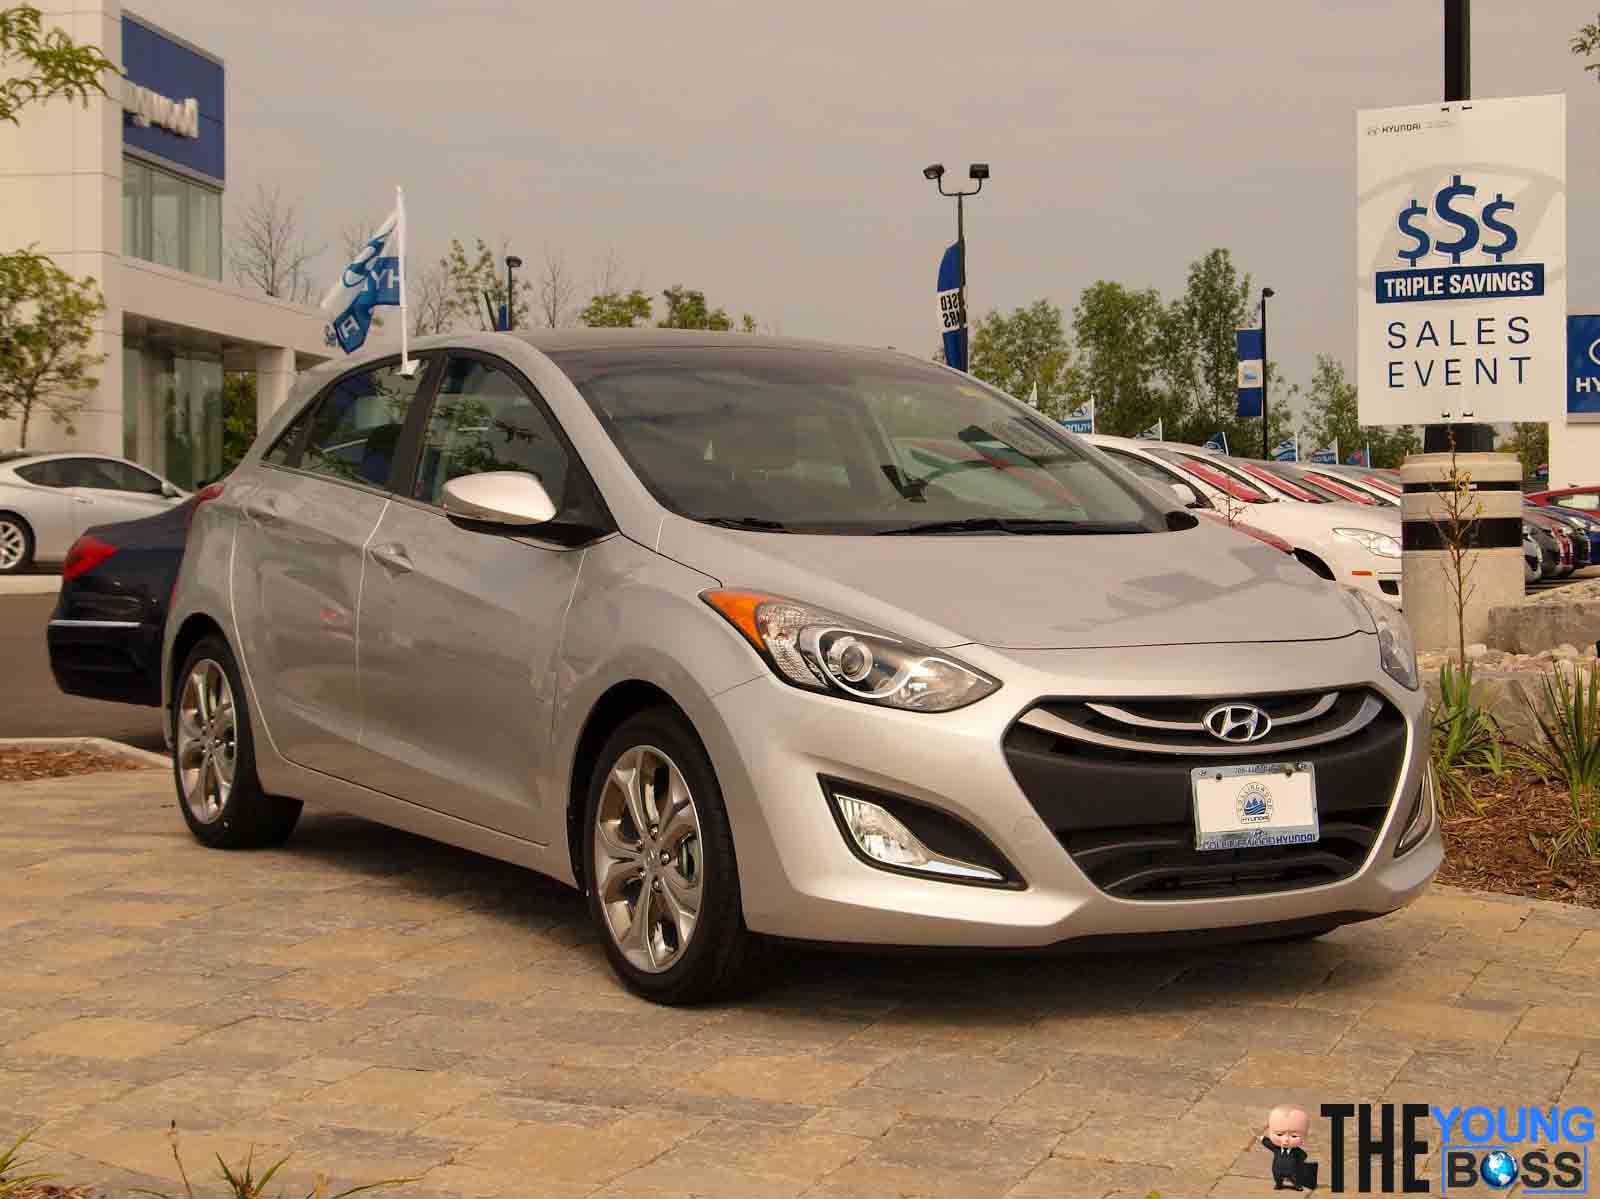 Hyundai Gap Insurance: What It Is, Benefits, Cost, What It Covers3 min read